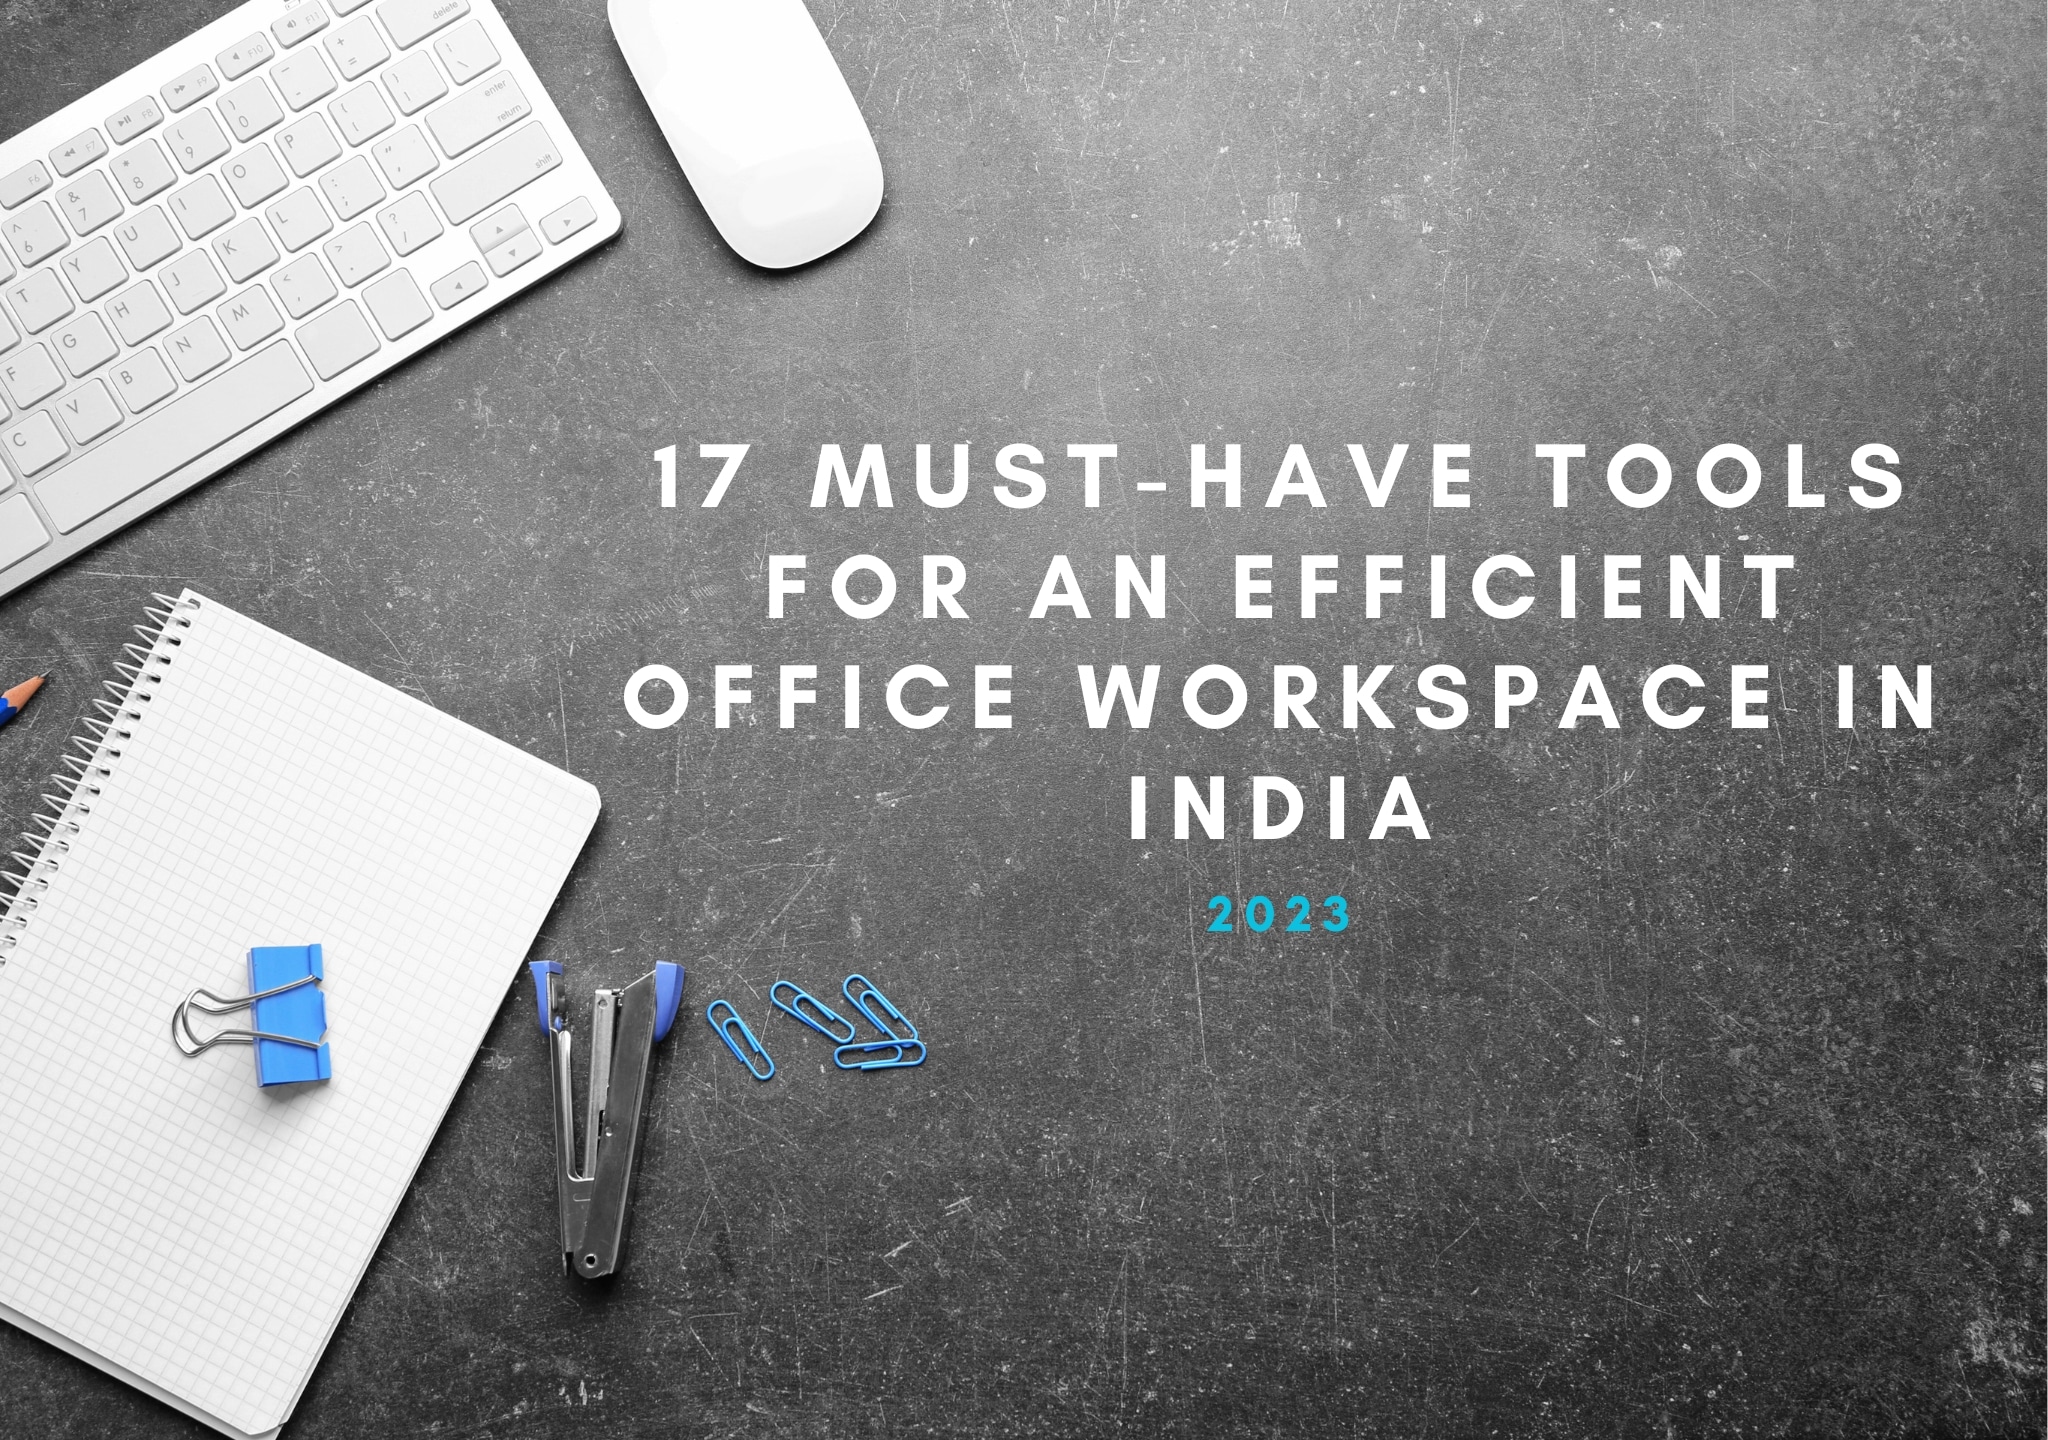 9 Must-Have Office Supplies for 2023: Boost Productivity